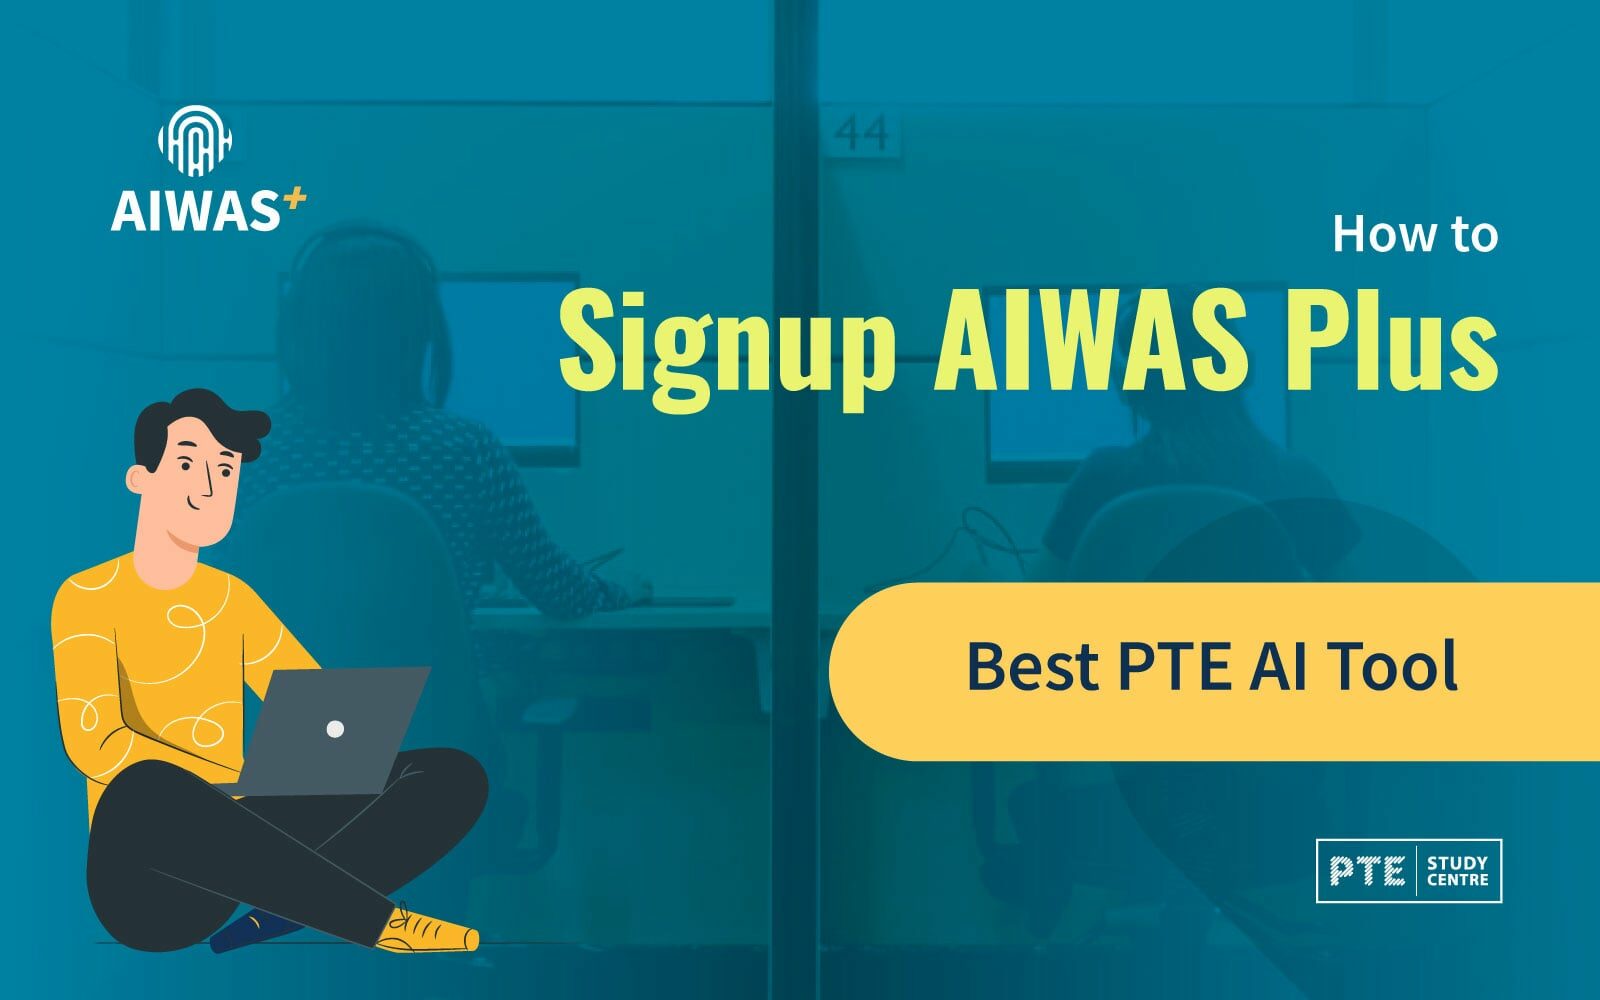 How to Signup AIWAS Plus?